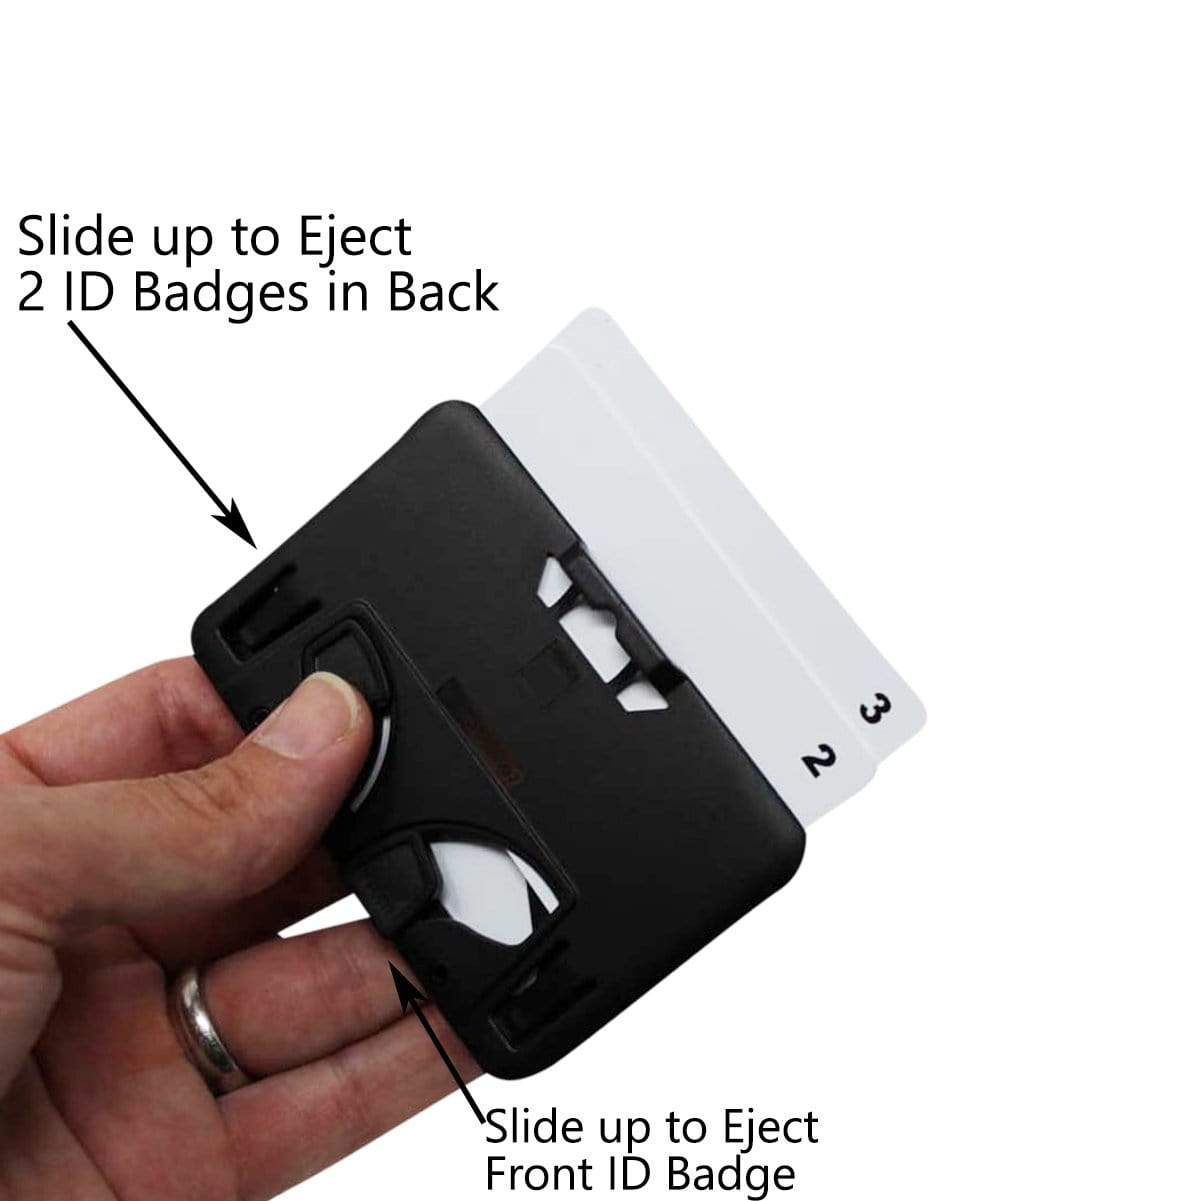 A hand holding the Specialist ID Horizontal 3 Card Badge Holder & Heavy Duty Lanyard with Breakaway Clip and Key Ring - Hard Plastic Rigid Name Tag Protector -Top Load for Three Badges with a thumb sliding a lever to eject one of the two white cards from the back. Text instructions in the image indicate how to eject the front and back cards, making it perfect for professional work wear.